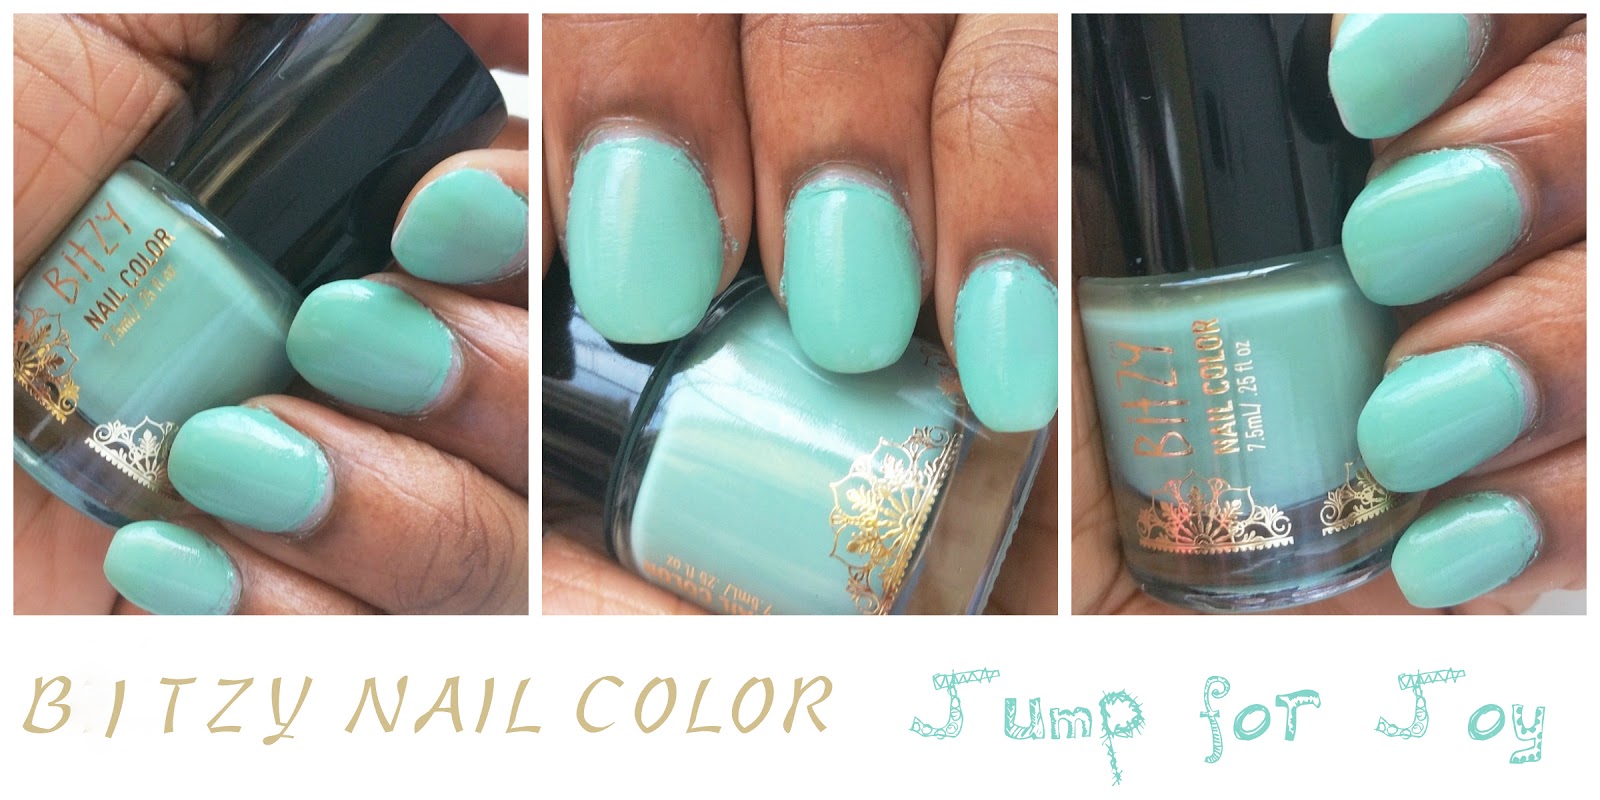 4. Bitzy Nail Polish Swatches in "Yes Please" Shade - wide 6